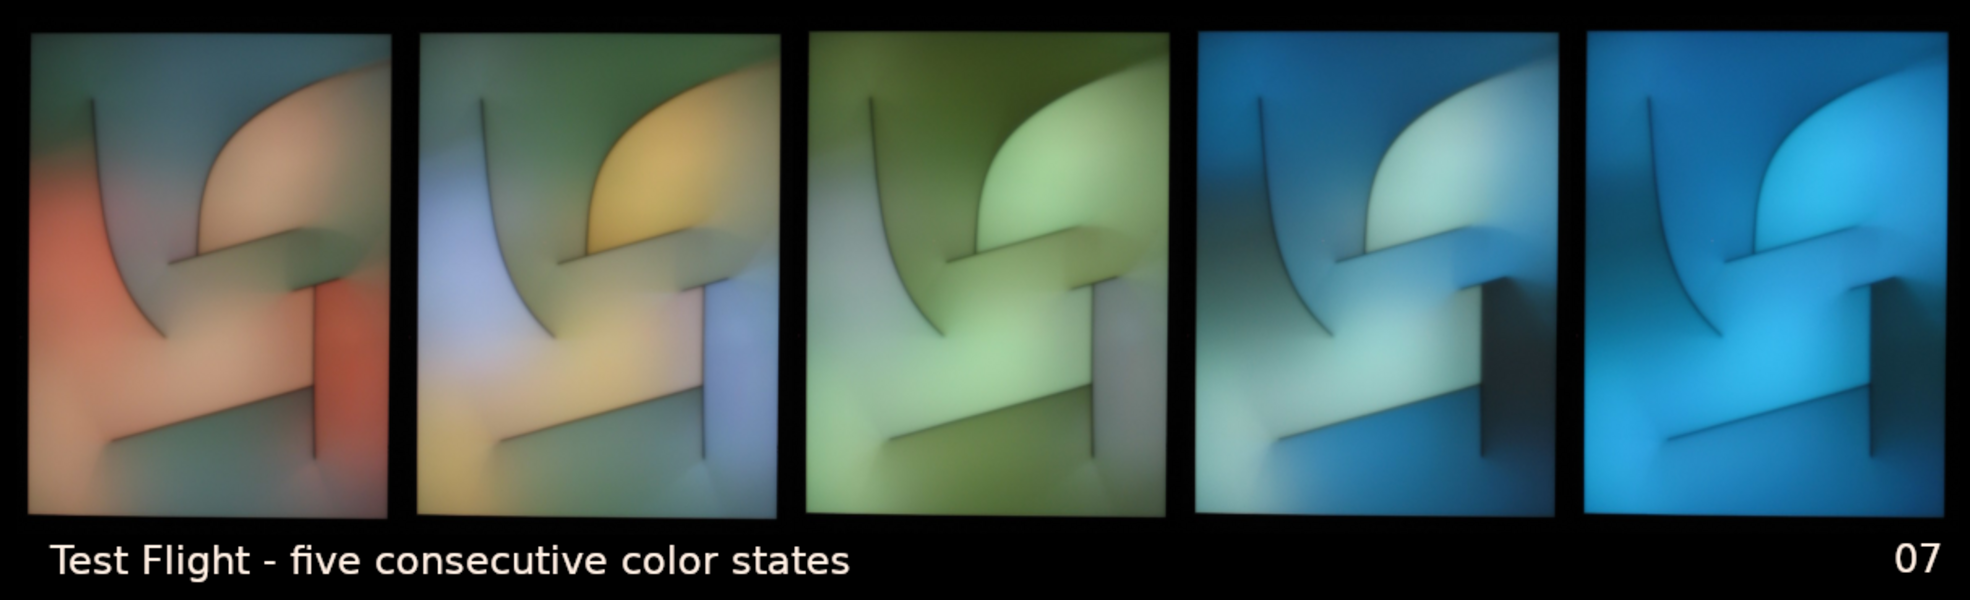 Test Flight in five consecutive color-states.